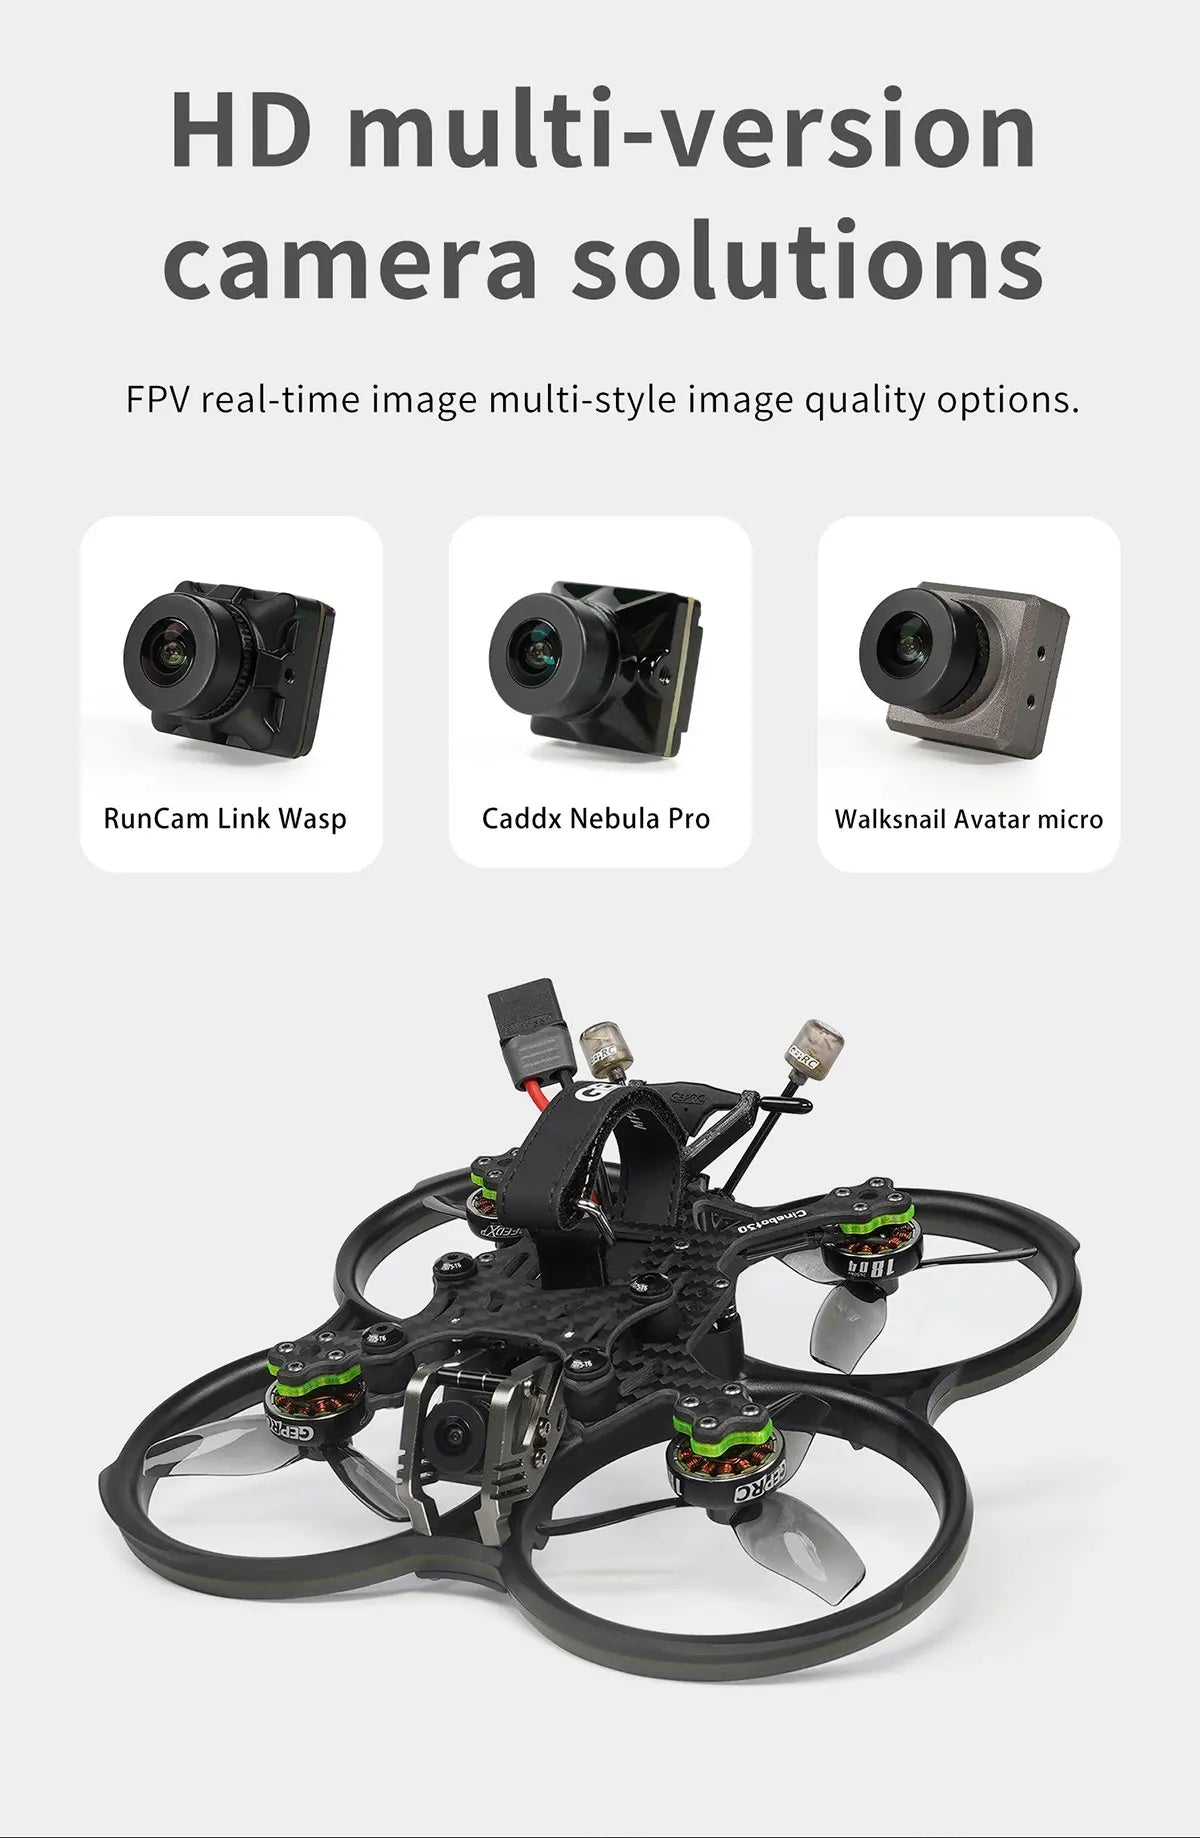 GEPRC Cinebot30 HD - Runcam Link Wasp 4S FPV, GEPRC Cinebot30 HD, HD multi-version camera solutions FPV real-time image quality options . RunC